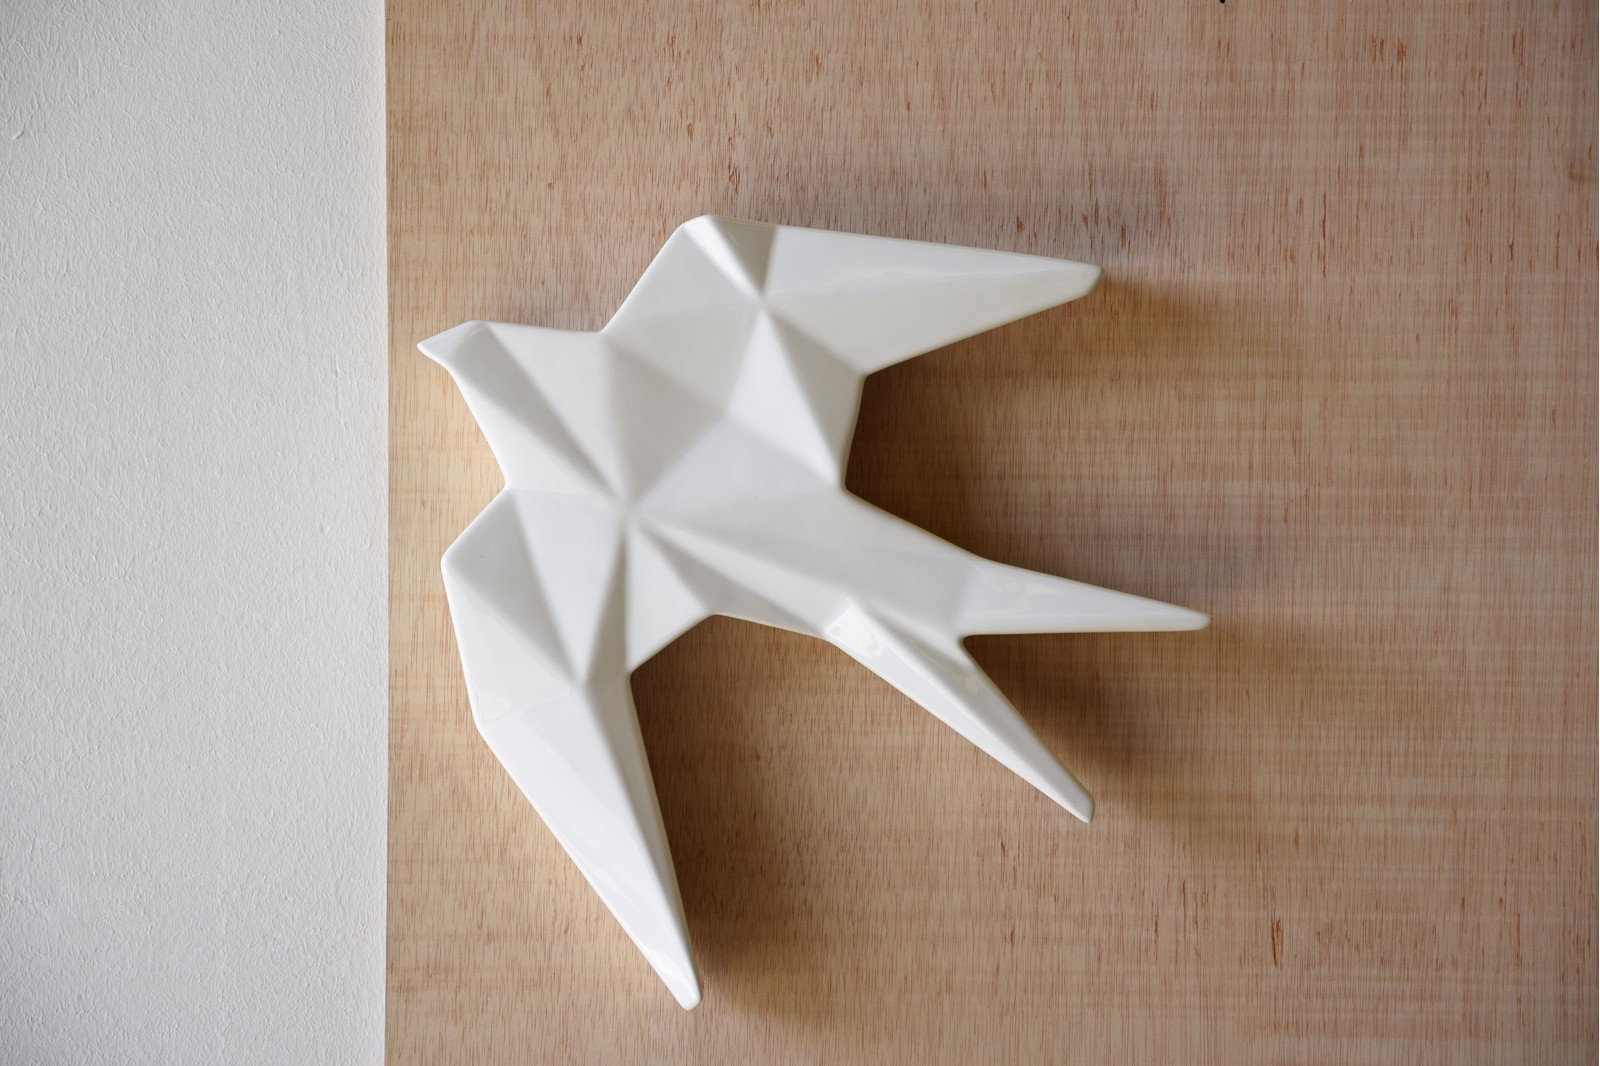 ANDURIÑA COLLECTION. GLOSSY WHITE CERAMIC WALL SCULPTURE